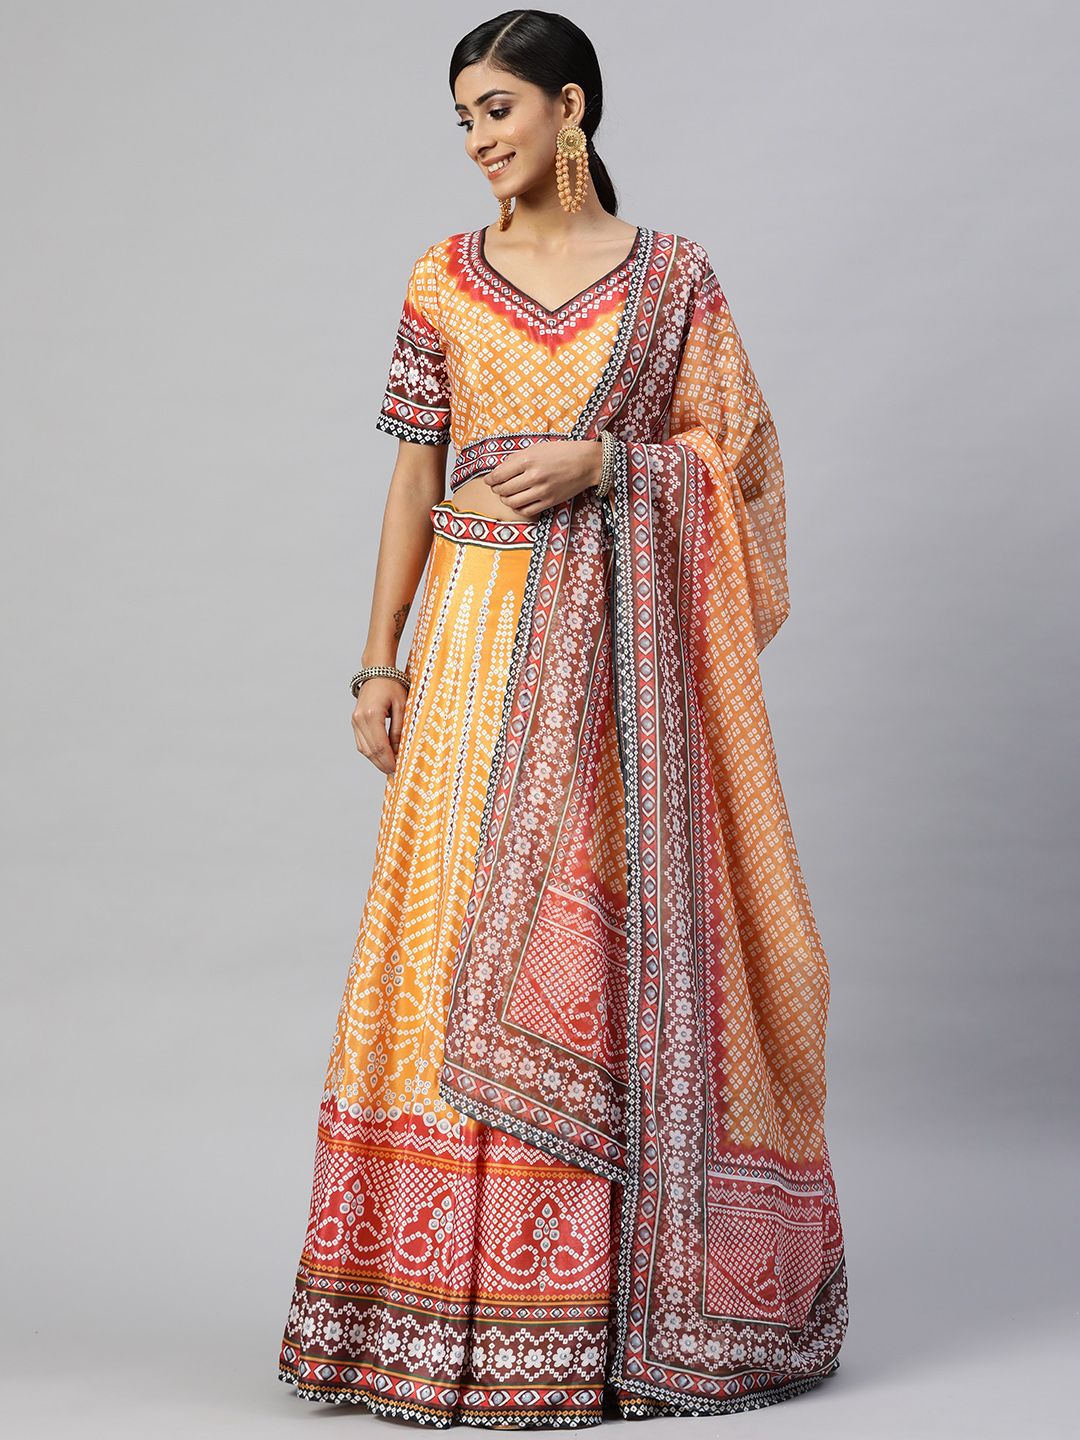 Readiprint Fashions Yellow & White Printed Semi-Stitched Lehenga & Unstitched Blouse With Dupatta Price in India